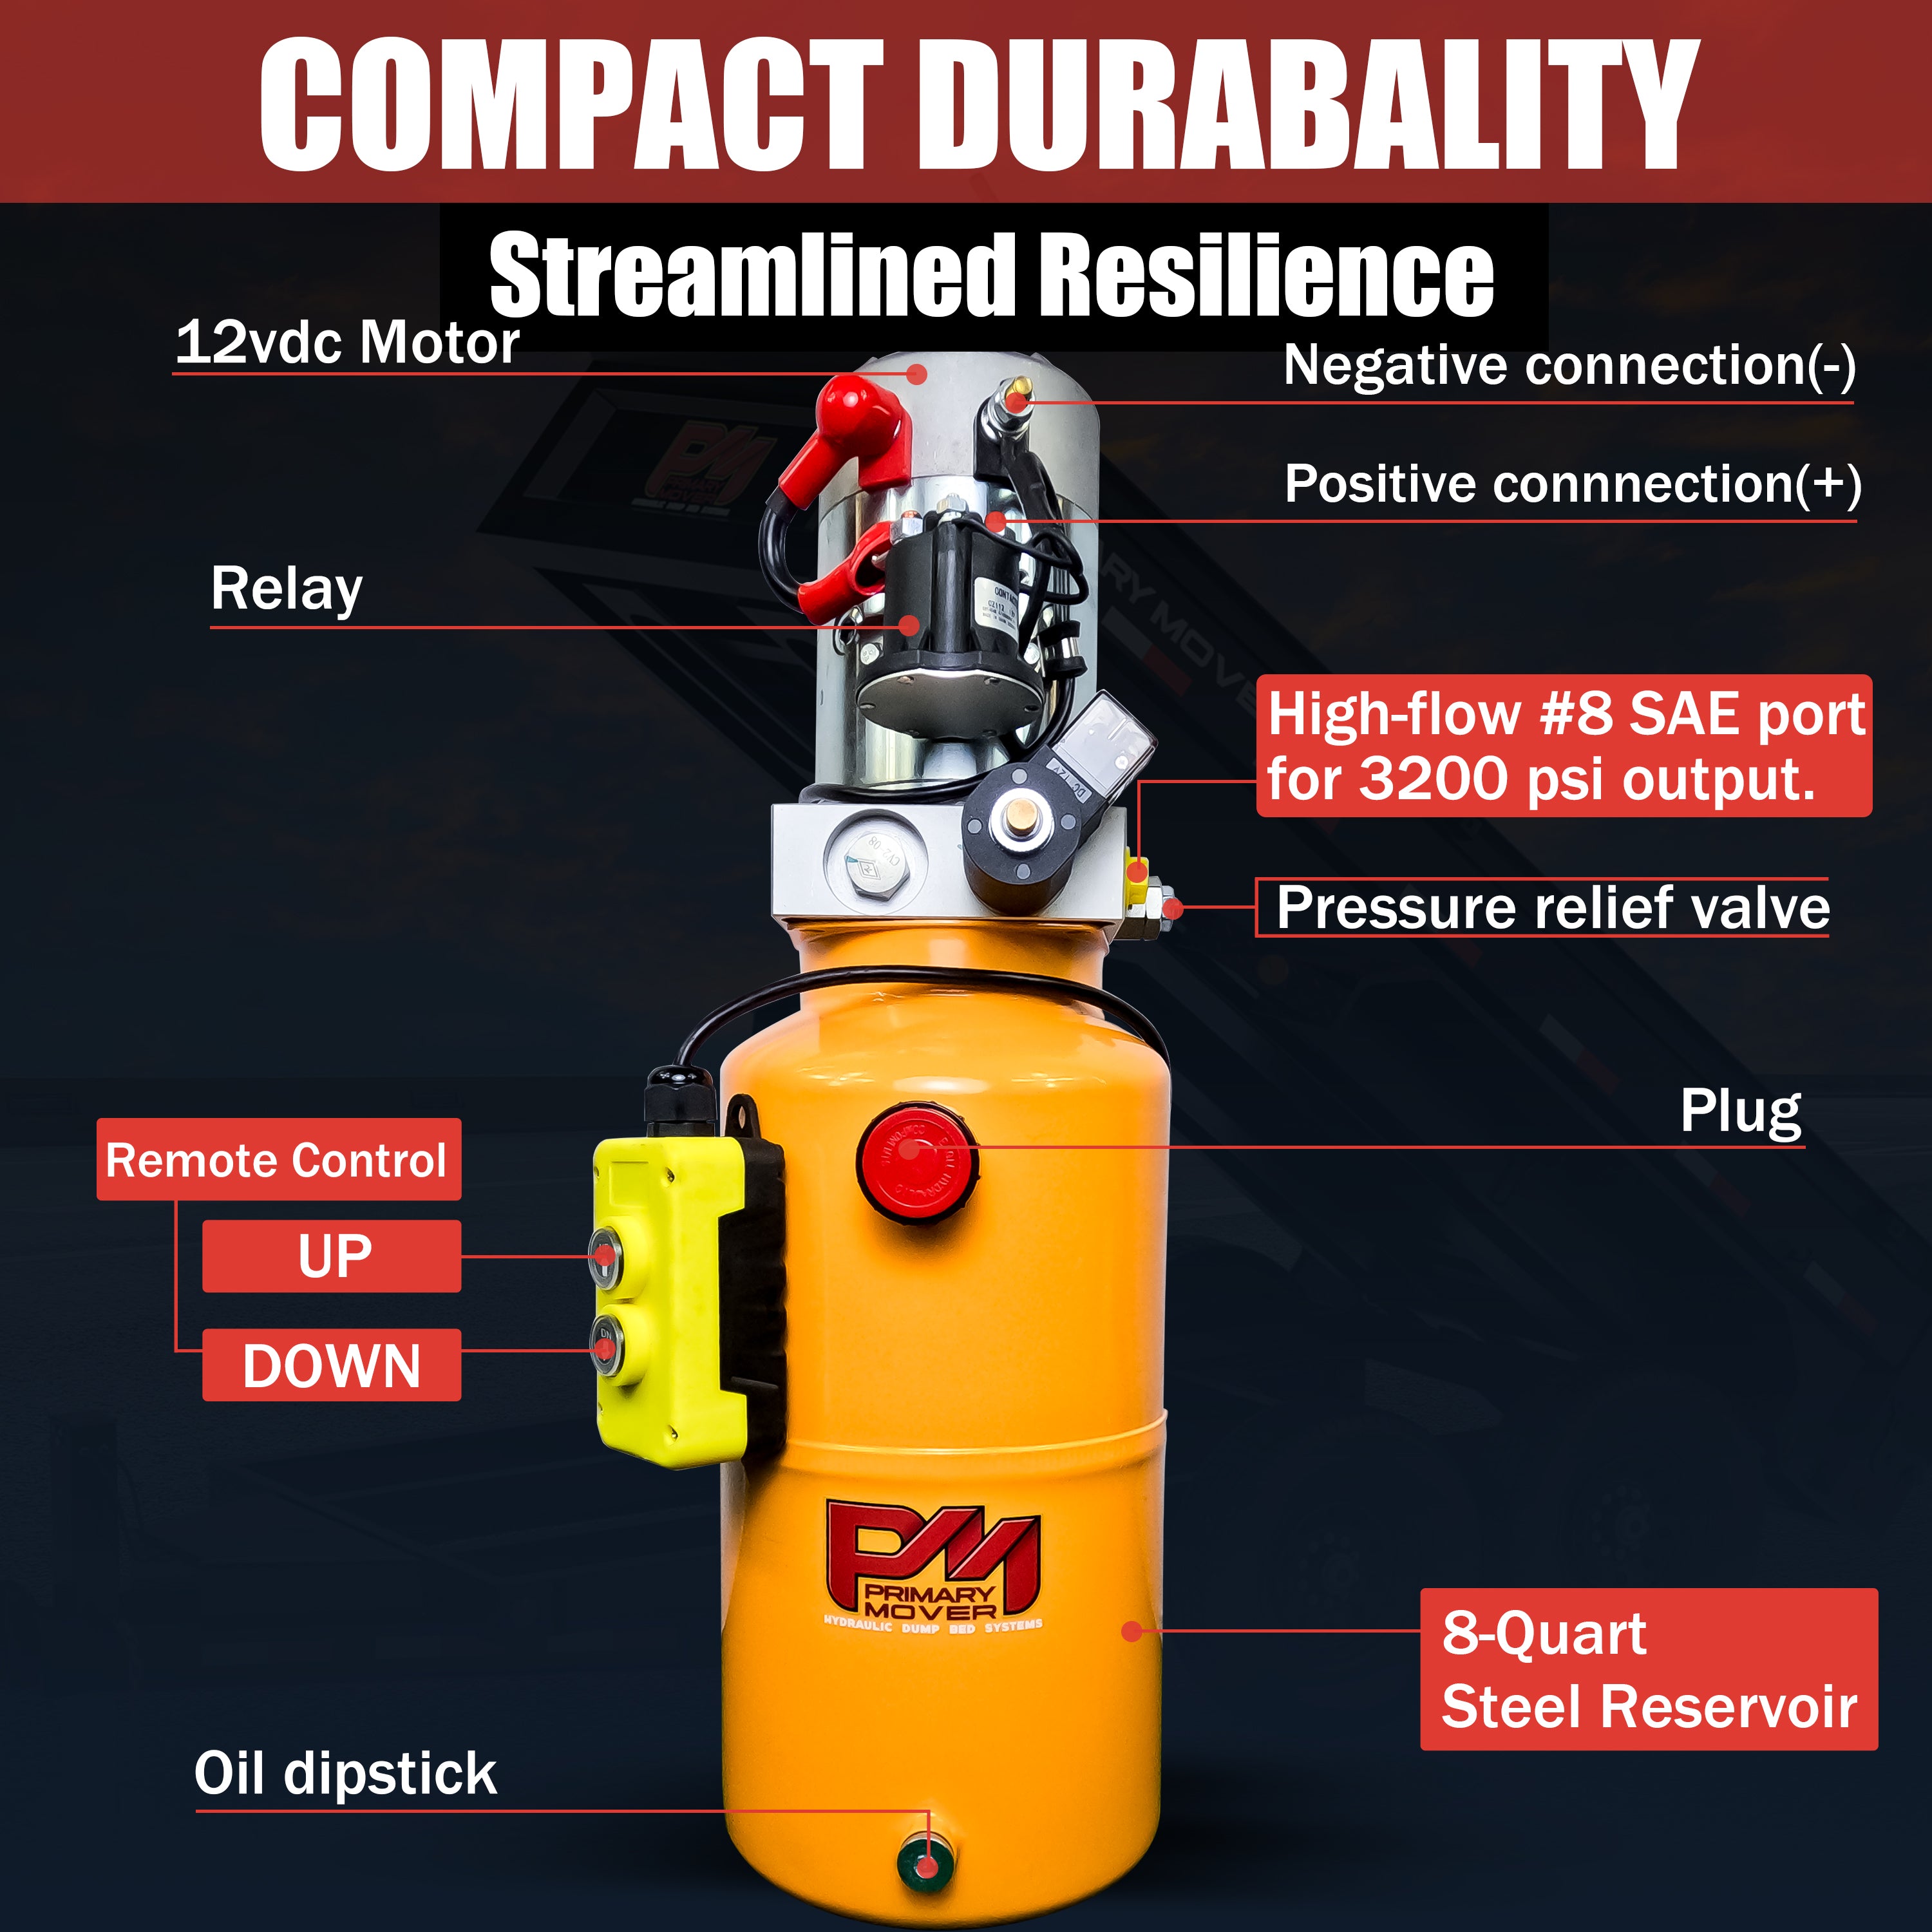 Primary Mover 12V Single-Acting Hydraulic Pump - Steel Reservoir for hydraulic dump bed systems. High flow, 3200 PSI relief setting, 2.5 GPM, 4 Quart Reservoir, handheld pendant.